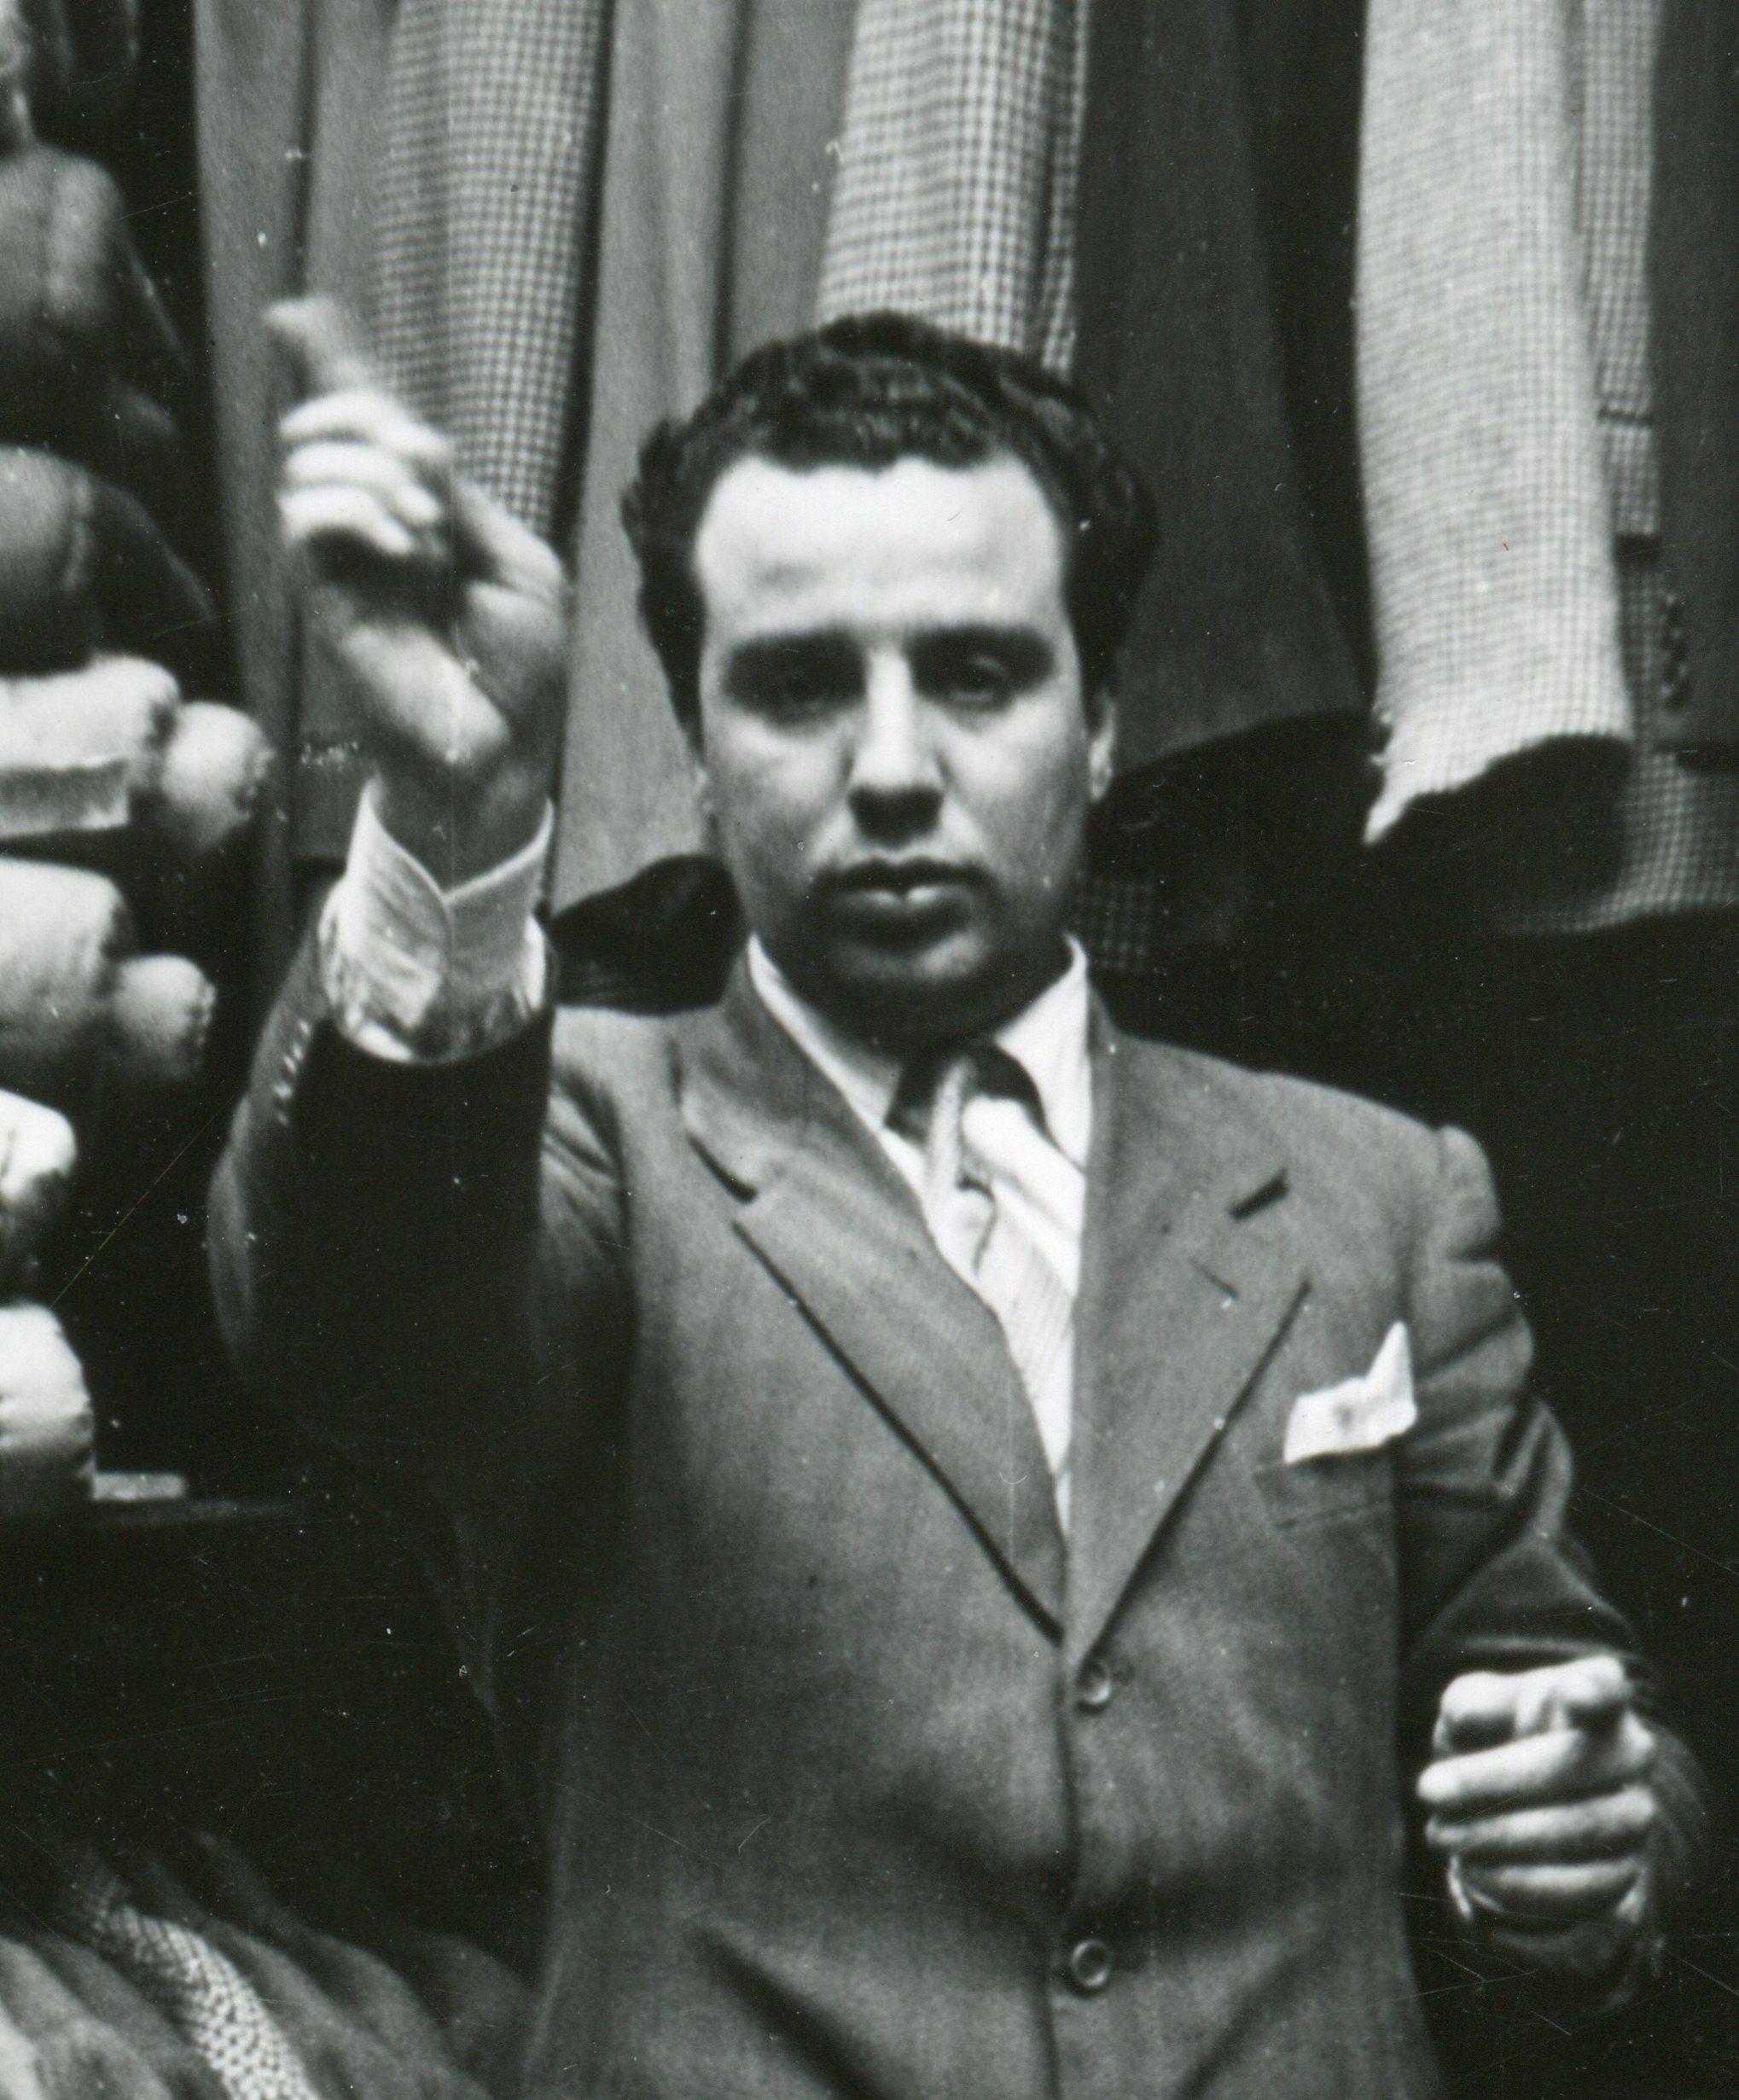 Rome - Salesman 1954 - Photograph by Erich Andres